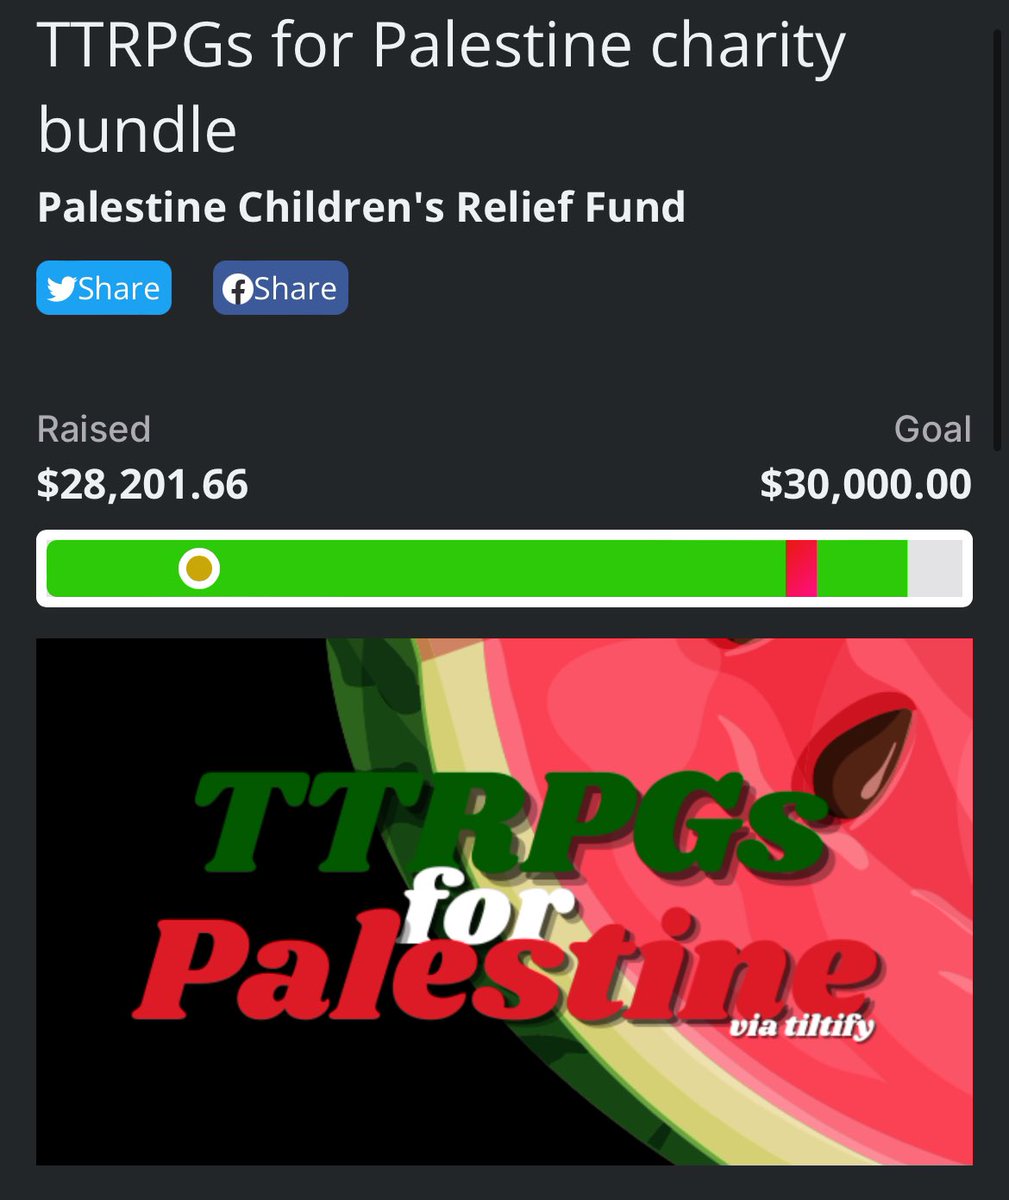 TTRPGs for Palestine via tiltify charity bundle been EXTENDED. Donations will close at the end of day on Friday, May 3! There are 190+ TTRPGs for you to discover for a $15+ donation to @ThePCRF Donate here to help us reach our $30,000 goal: tiltify.com/@jesthehuman/t…